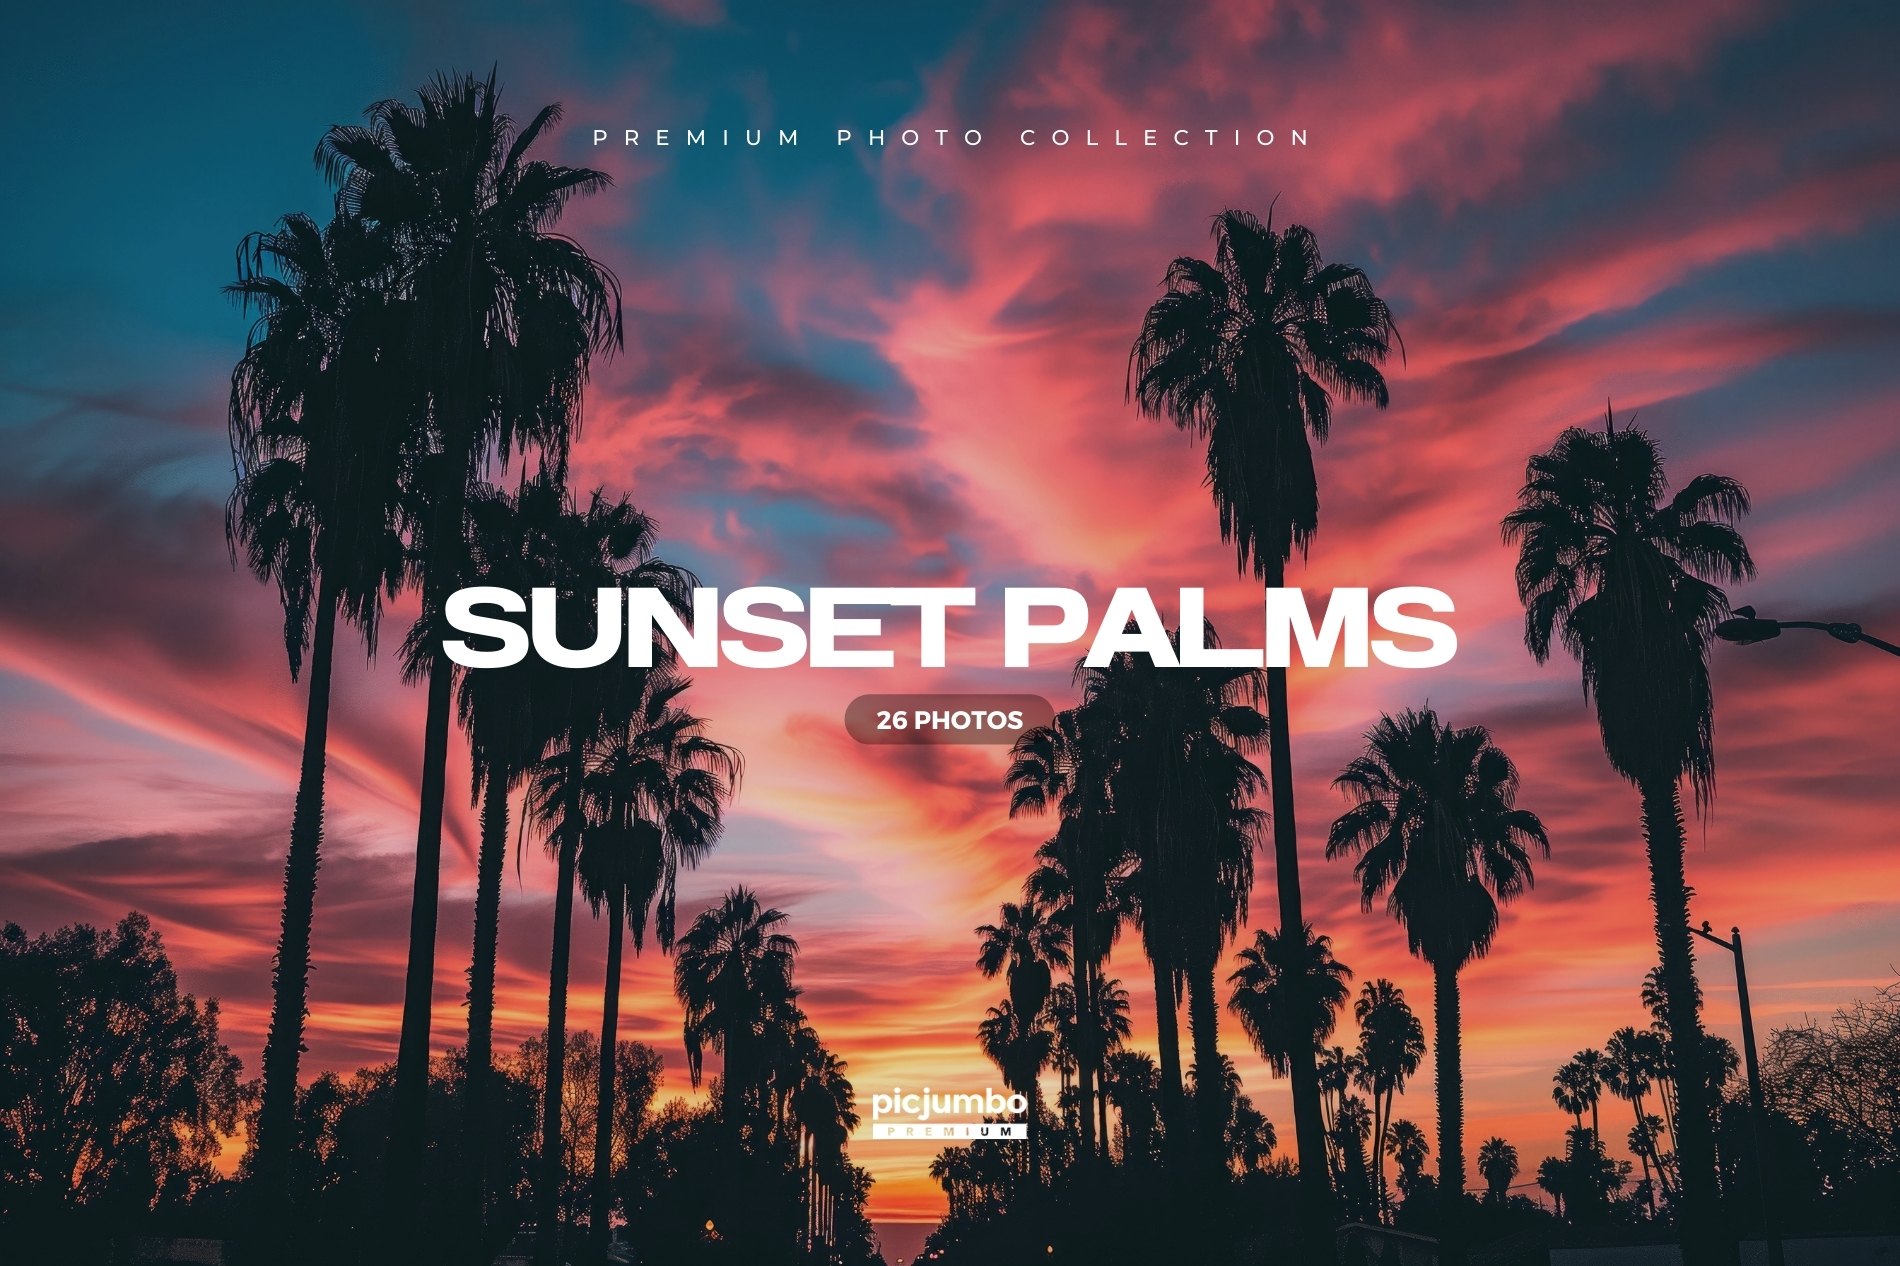 Download hi-res stock photos from our Sunset Palms PREMIUM Collection!